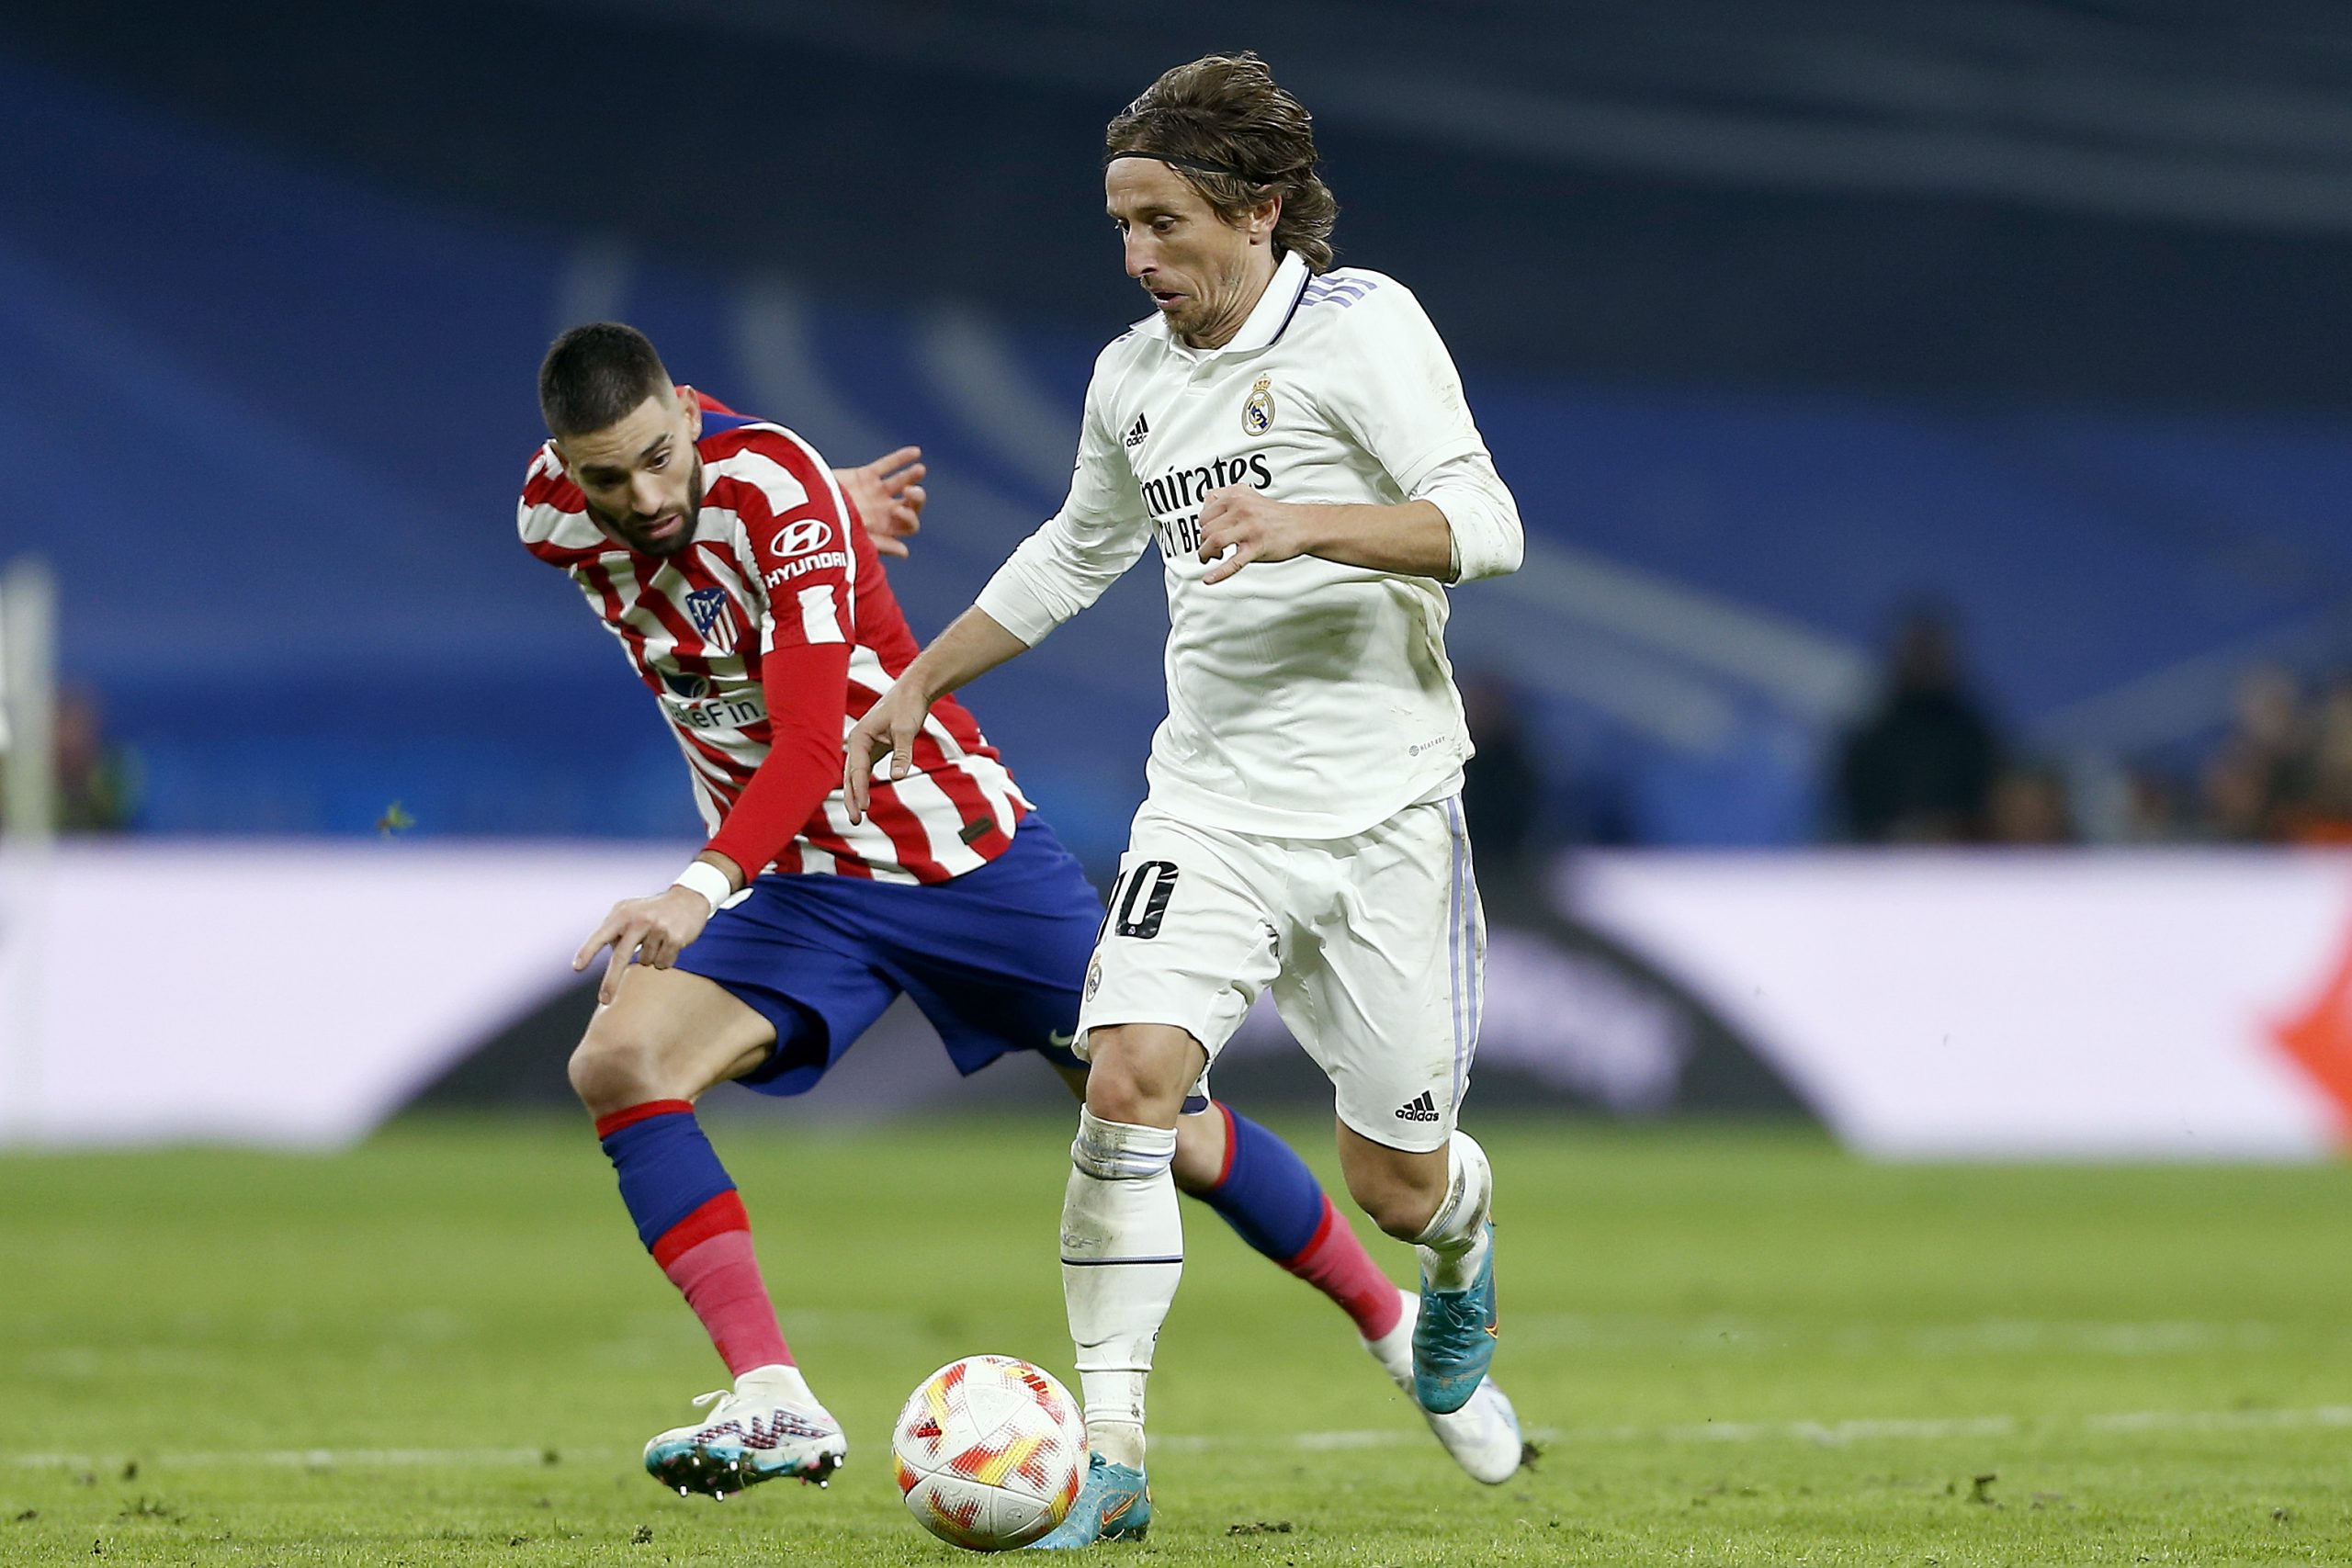 Luka Modric of Real Madrid being followed by Yannick Carrasco of Atletico de Madrid during the Copa Del Rey Quarter Final match between Real Madrid and Atletico de Madrid at Estadio Santiago Bernabeu on January 26, 2023 in Madrid, Spain. (Photo by Florencia Tan Jun/Getty Images)